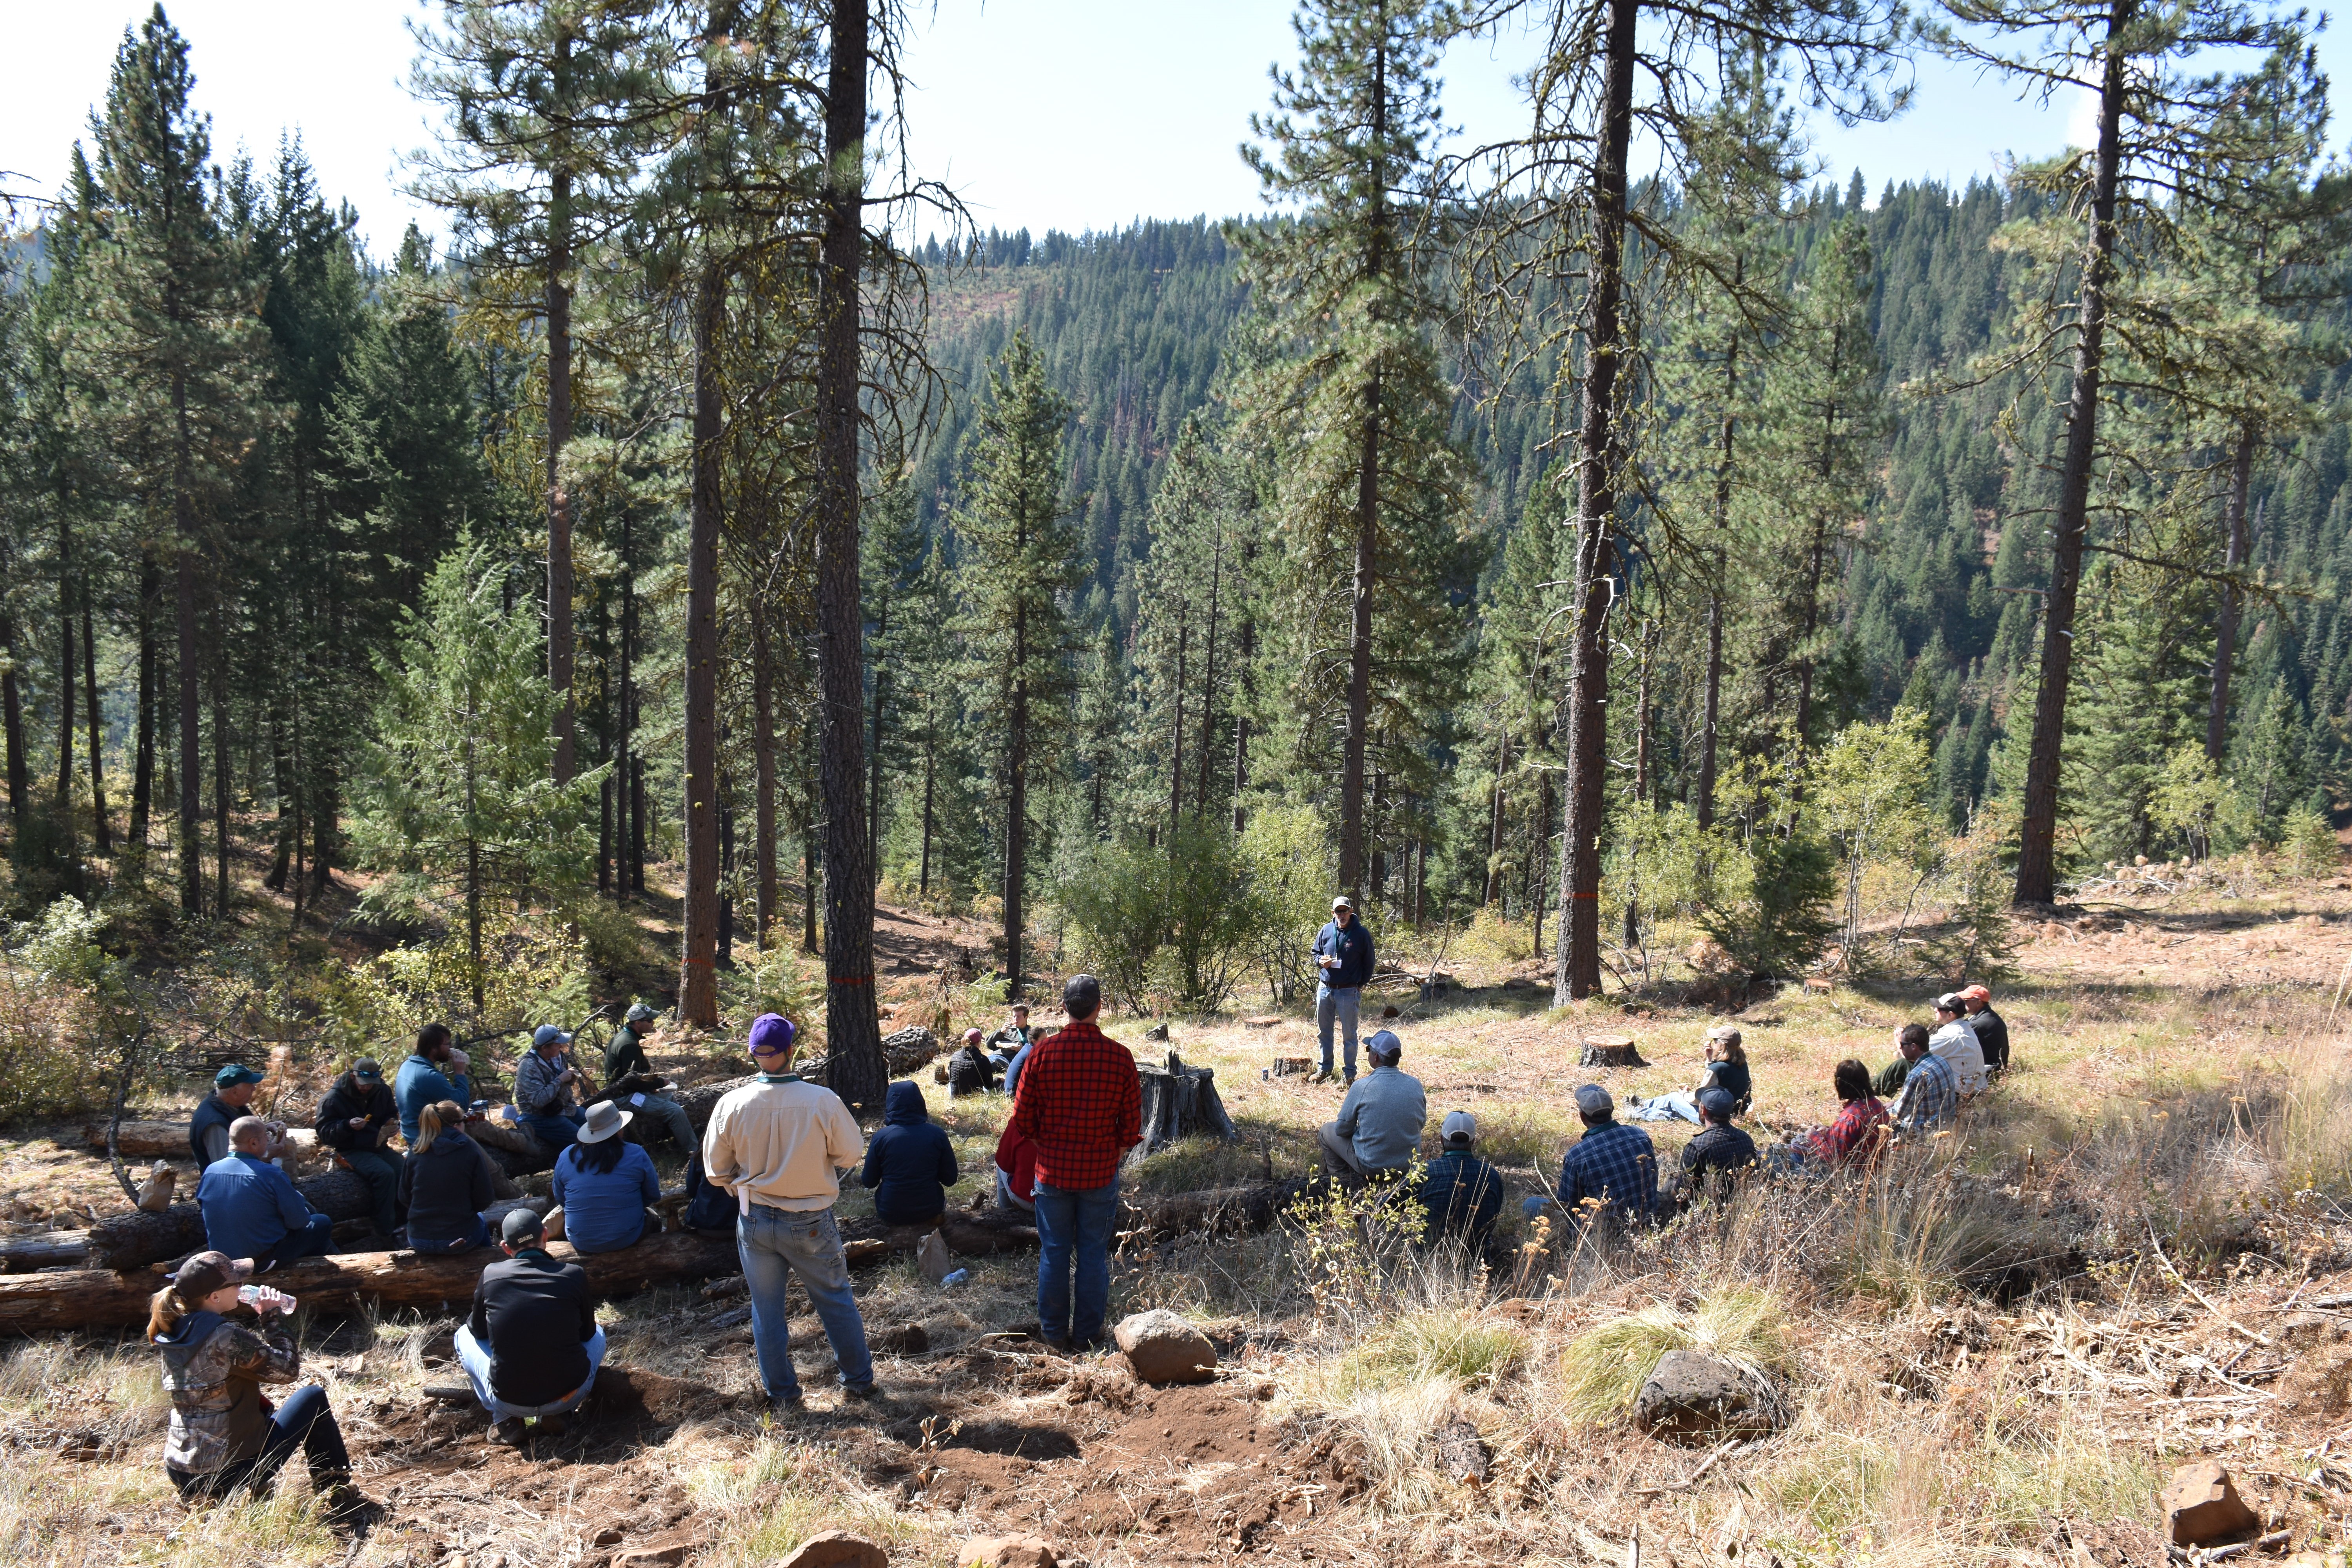 The Annual Inland West Active Forest Management Field Tour is organized by the SAF Snake River Chapter, University of Idaho, US Forest Service, and several TIMOs The field trip provides tremendous opportunities for working professionals and students to see innovations in Inland forest management.